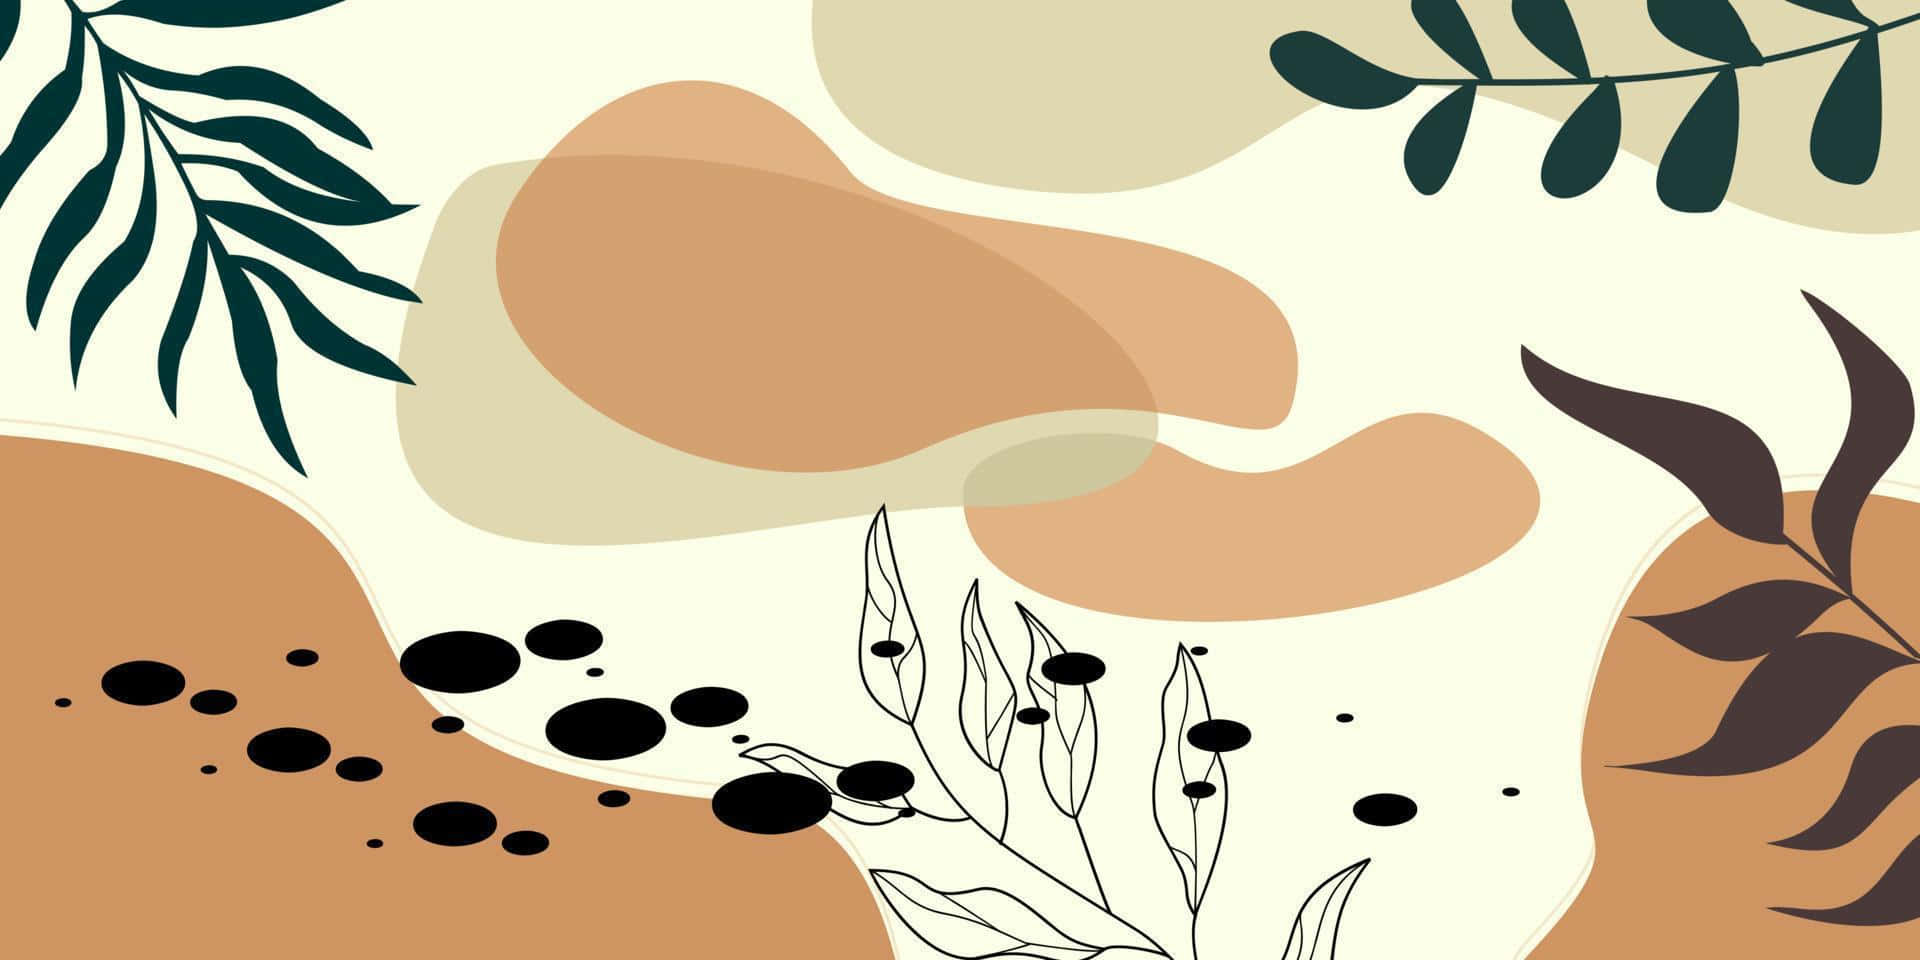 Abstract Pattern With Leaves And Polka Dots